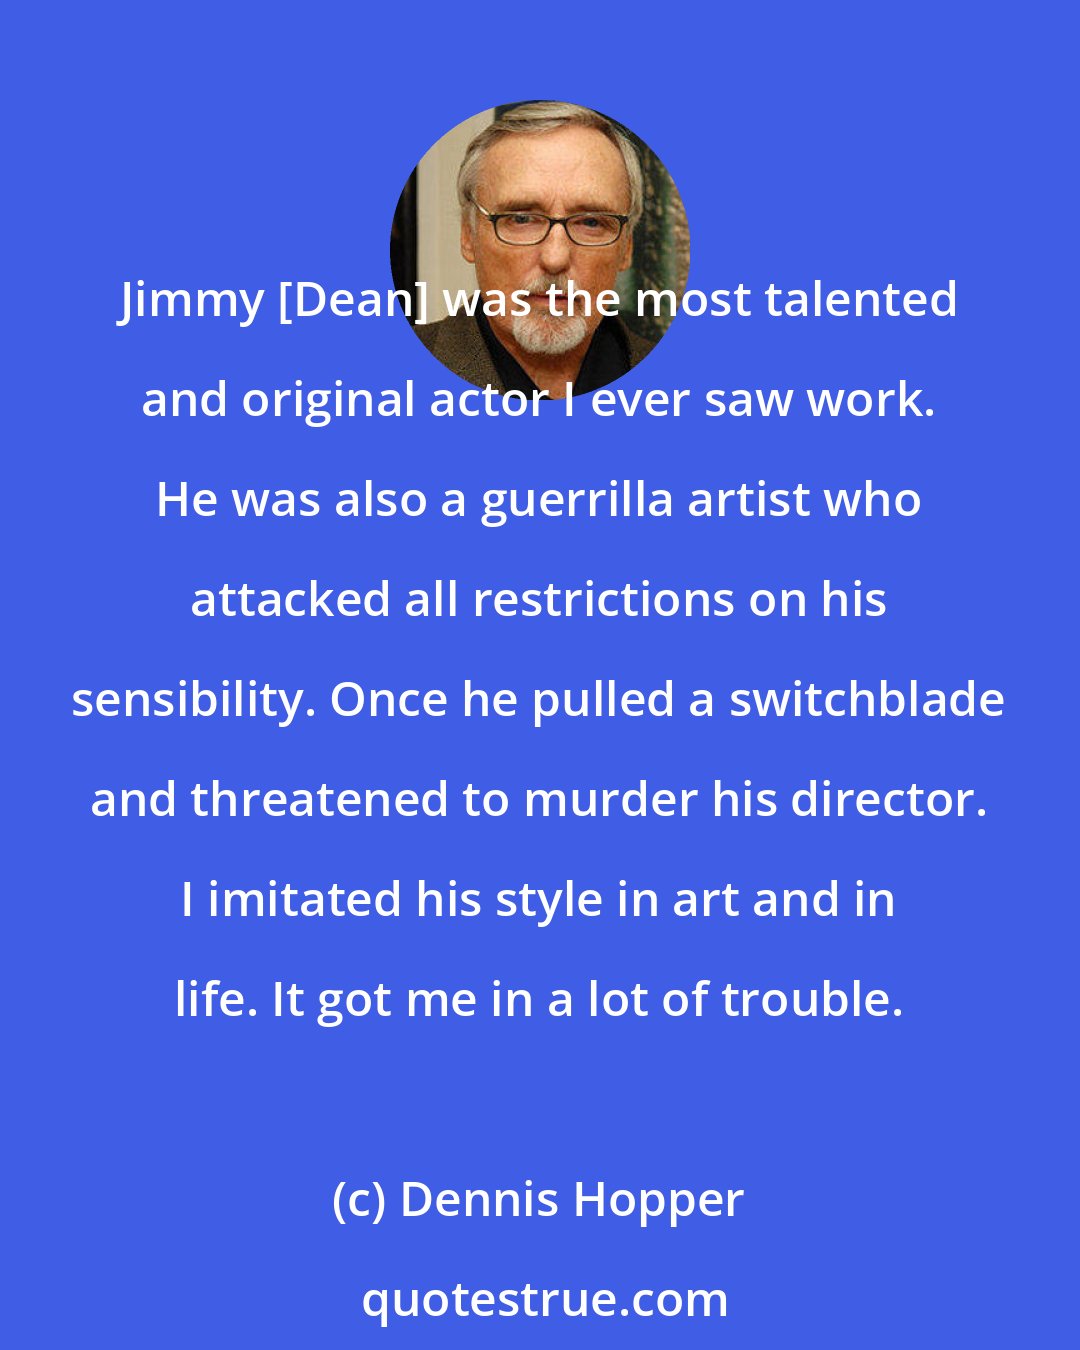 Dennis Hopper: Jimmy [Dean] was the most talented and original actor I ever saw work. He was also a guerrilla artist who attacked all restrictions on his sensibility. Once he pulled a switchblade and threatened to murder his director. I imitated his style in art and in life. It got me in a lot of trouble.